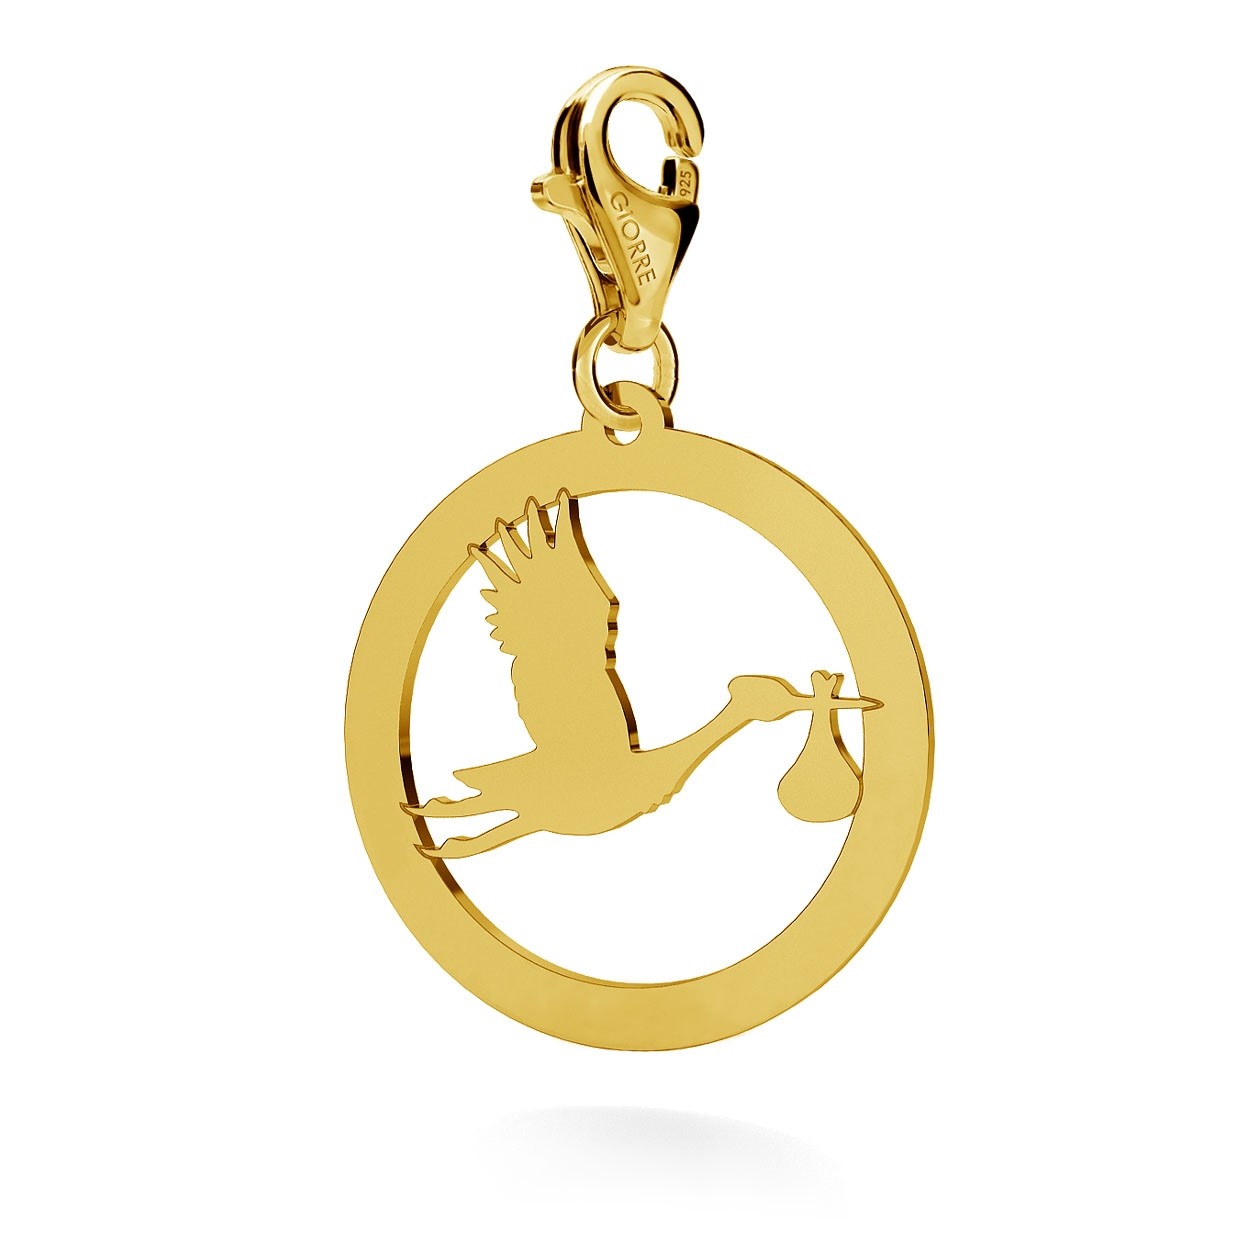 CHARM 125, STORK WITH ENGRAVE, STERLING SILVER (925) RHODIUM OR GOLD PLATED